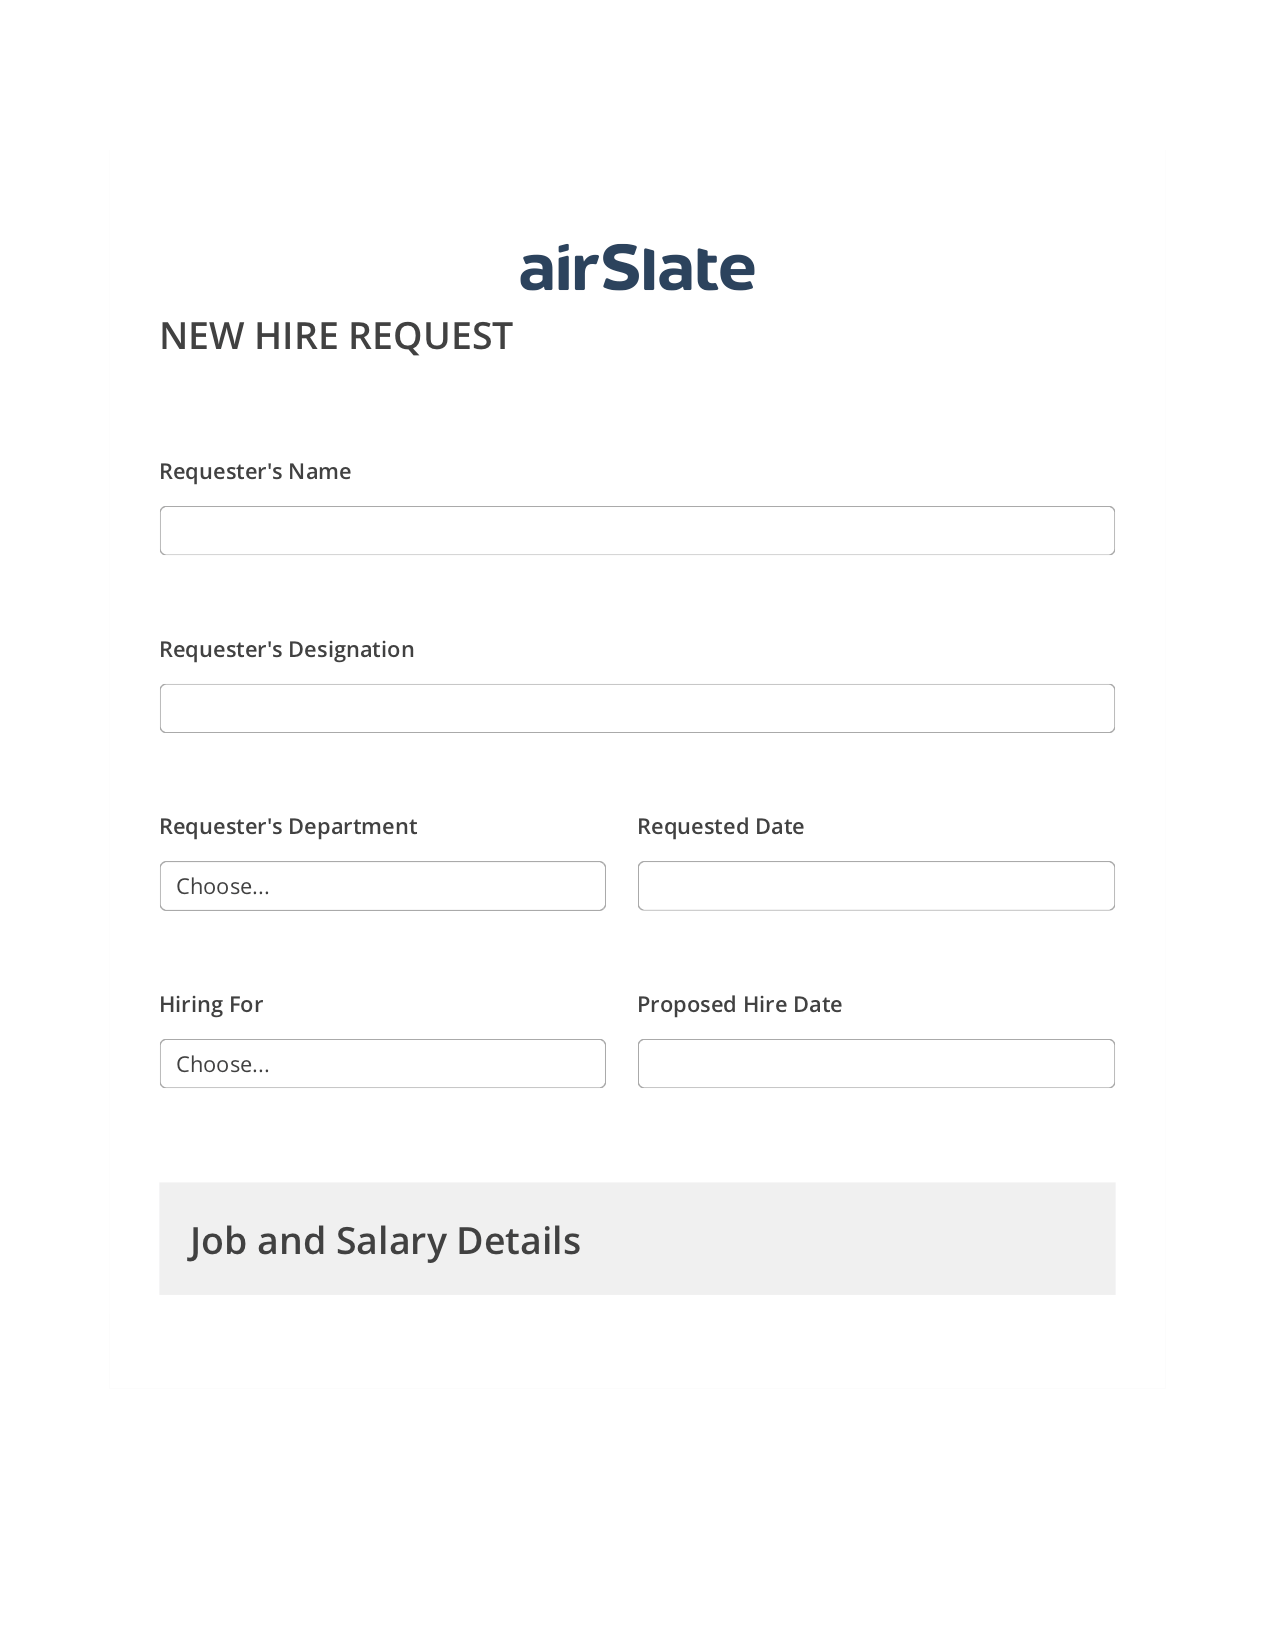 Hiring Request Workflow Pre-fill from Google Sheets Bot, Unassign Role Bot, Export to NetSuite Bot